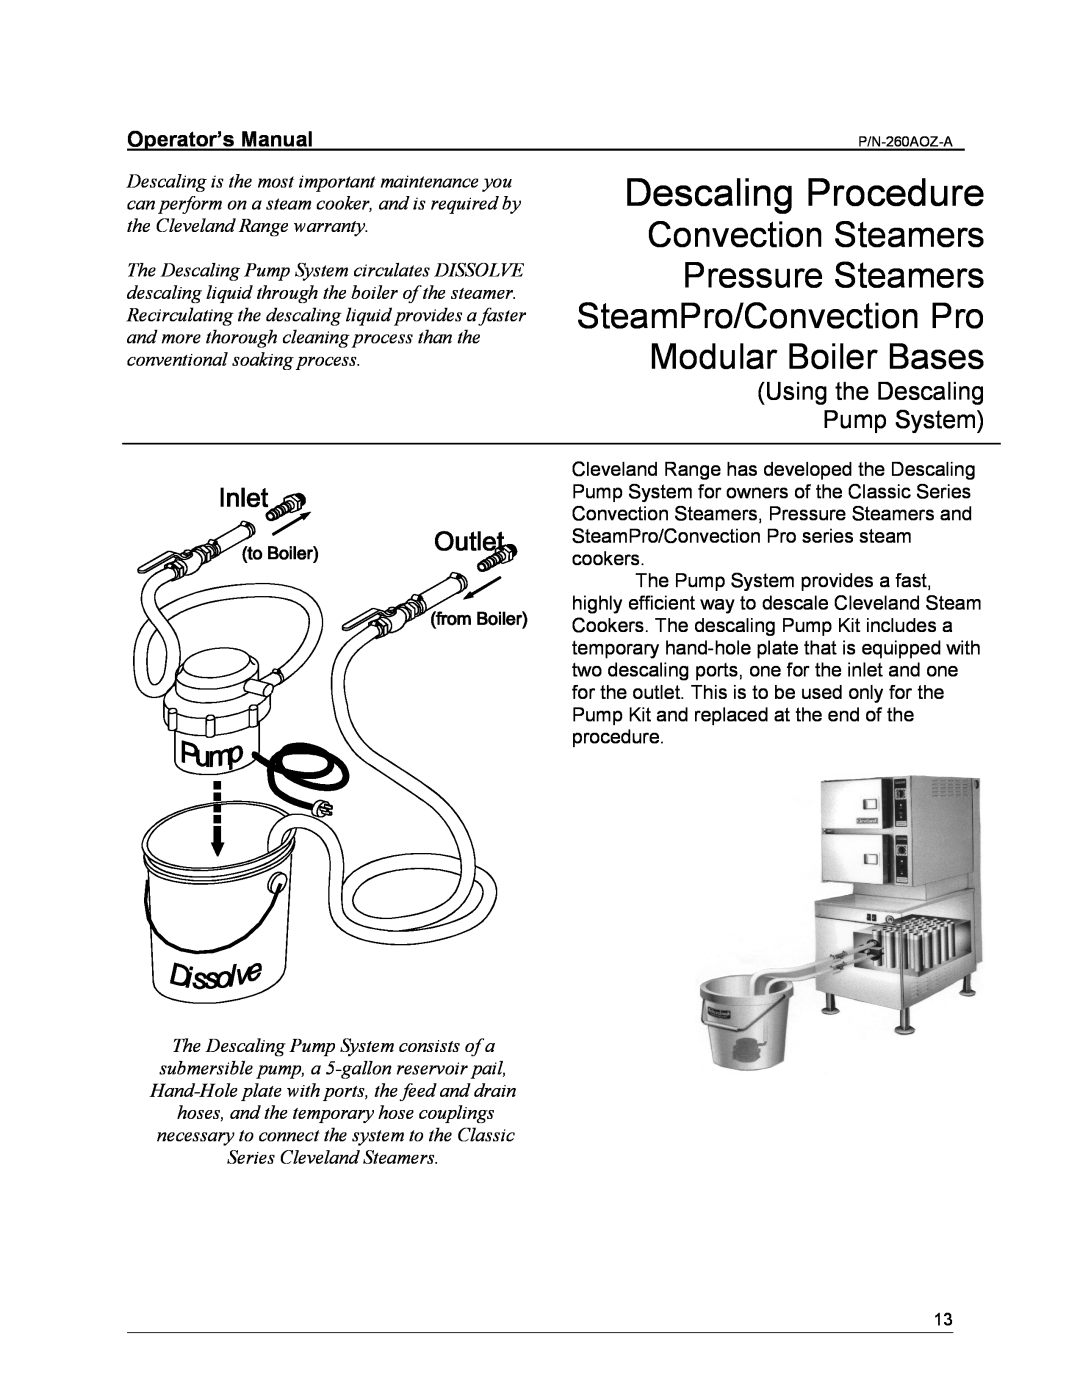 Cleveland Range 24/36CGM manual Using the Descaling Pump System, Descaling Procedure, Convection Steamers Pressure Steamers 